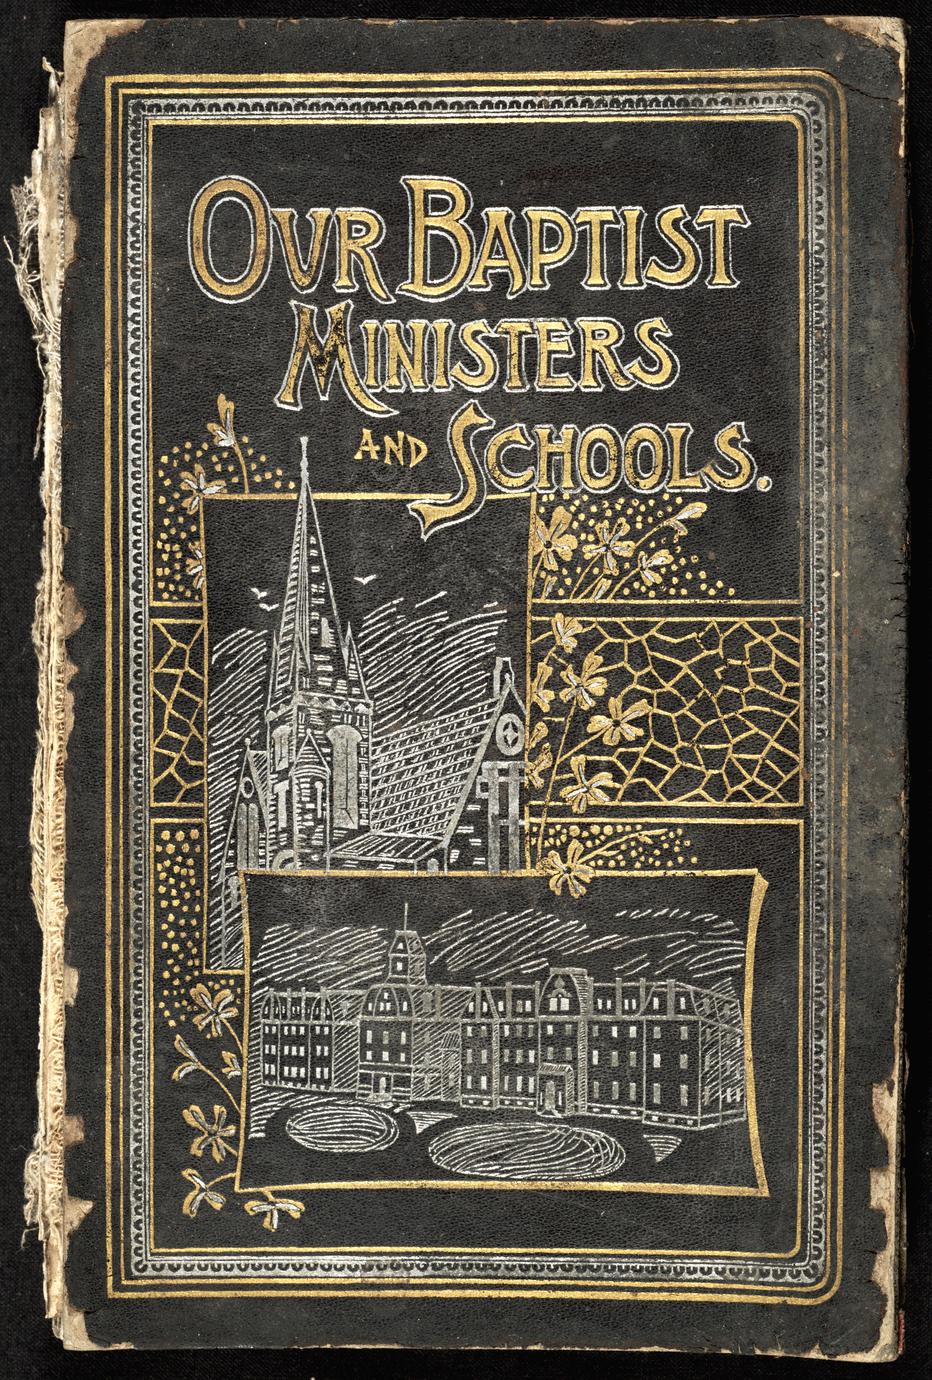 Our Baptist ministers and schools